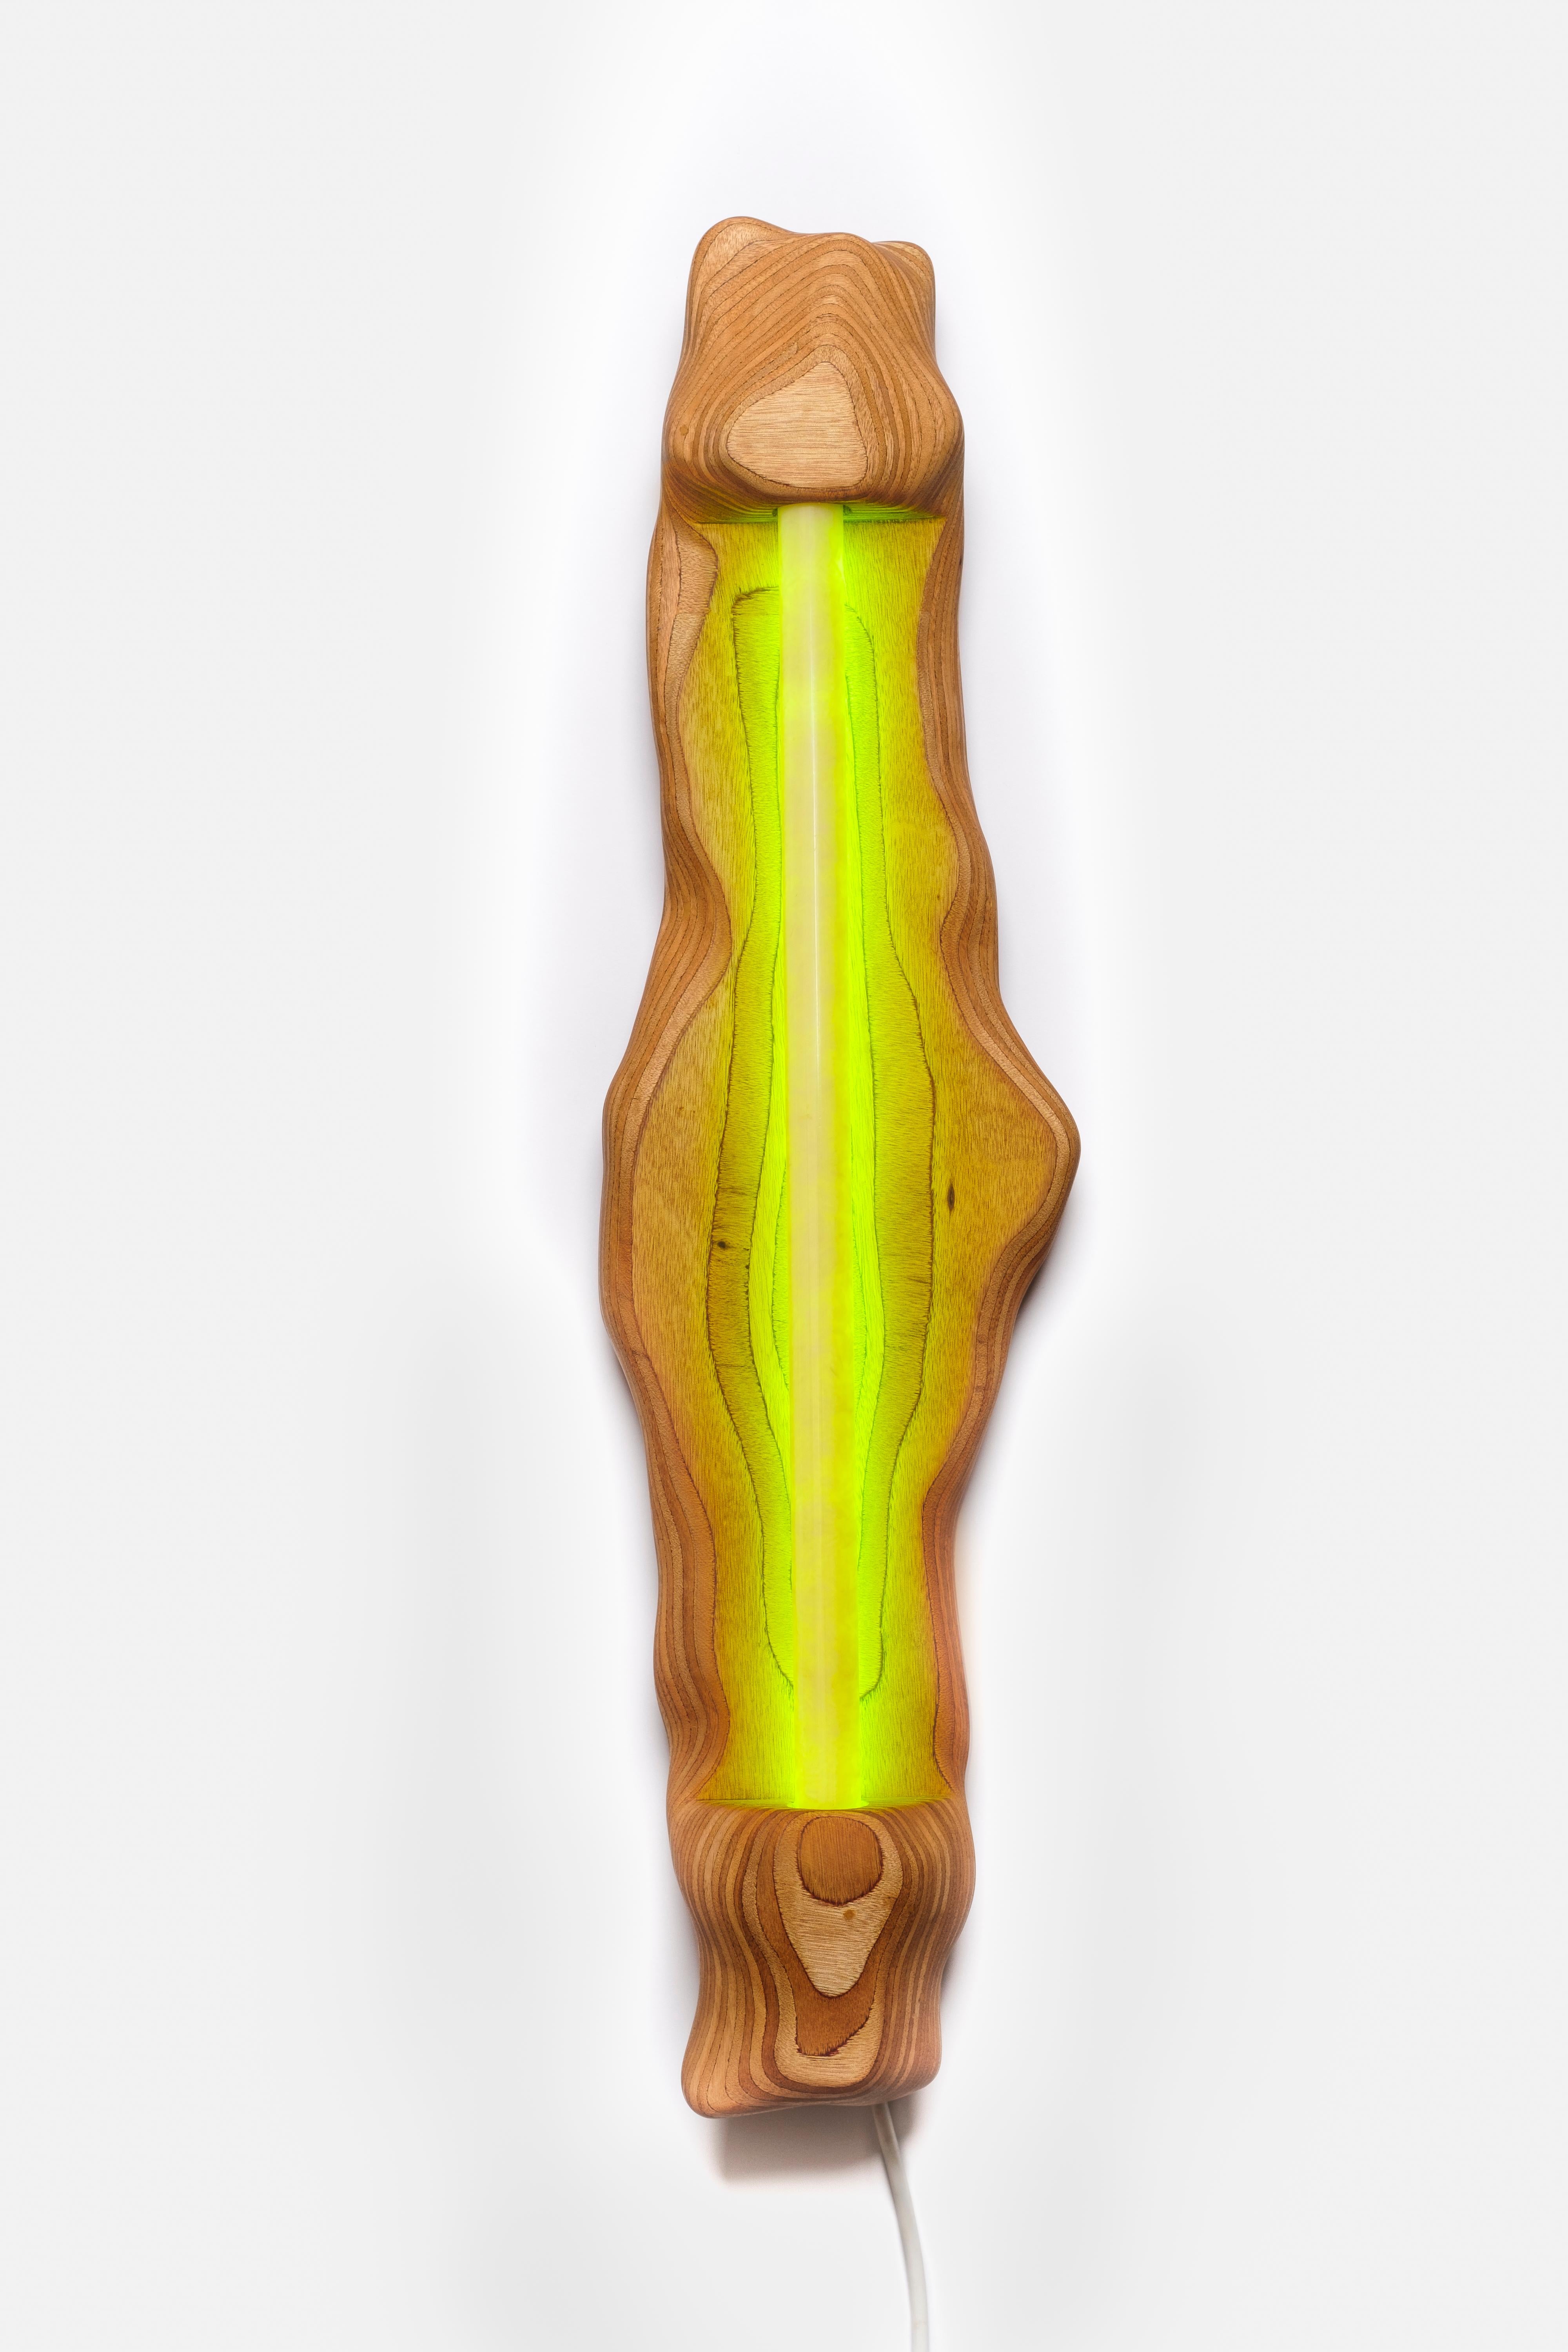 Dutch Wall Light of Okoume Wood and Neon. by Studio Gert Wessels For Sale